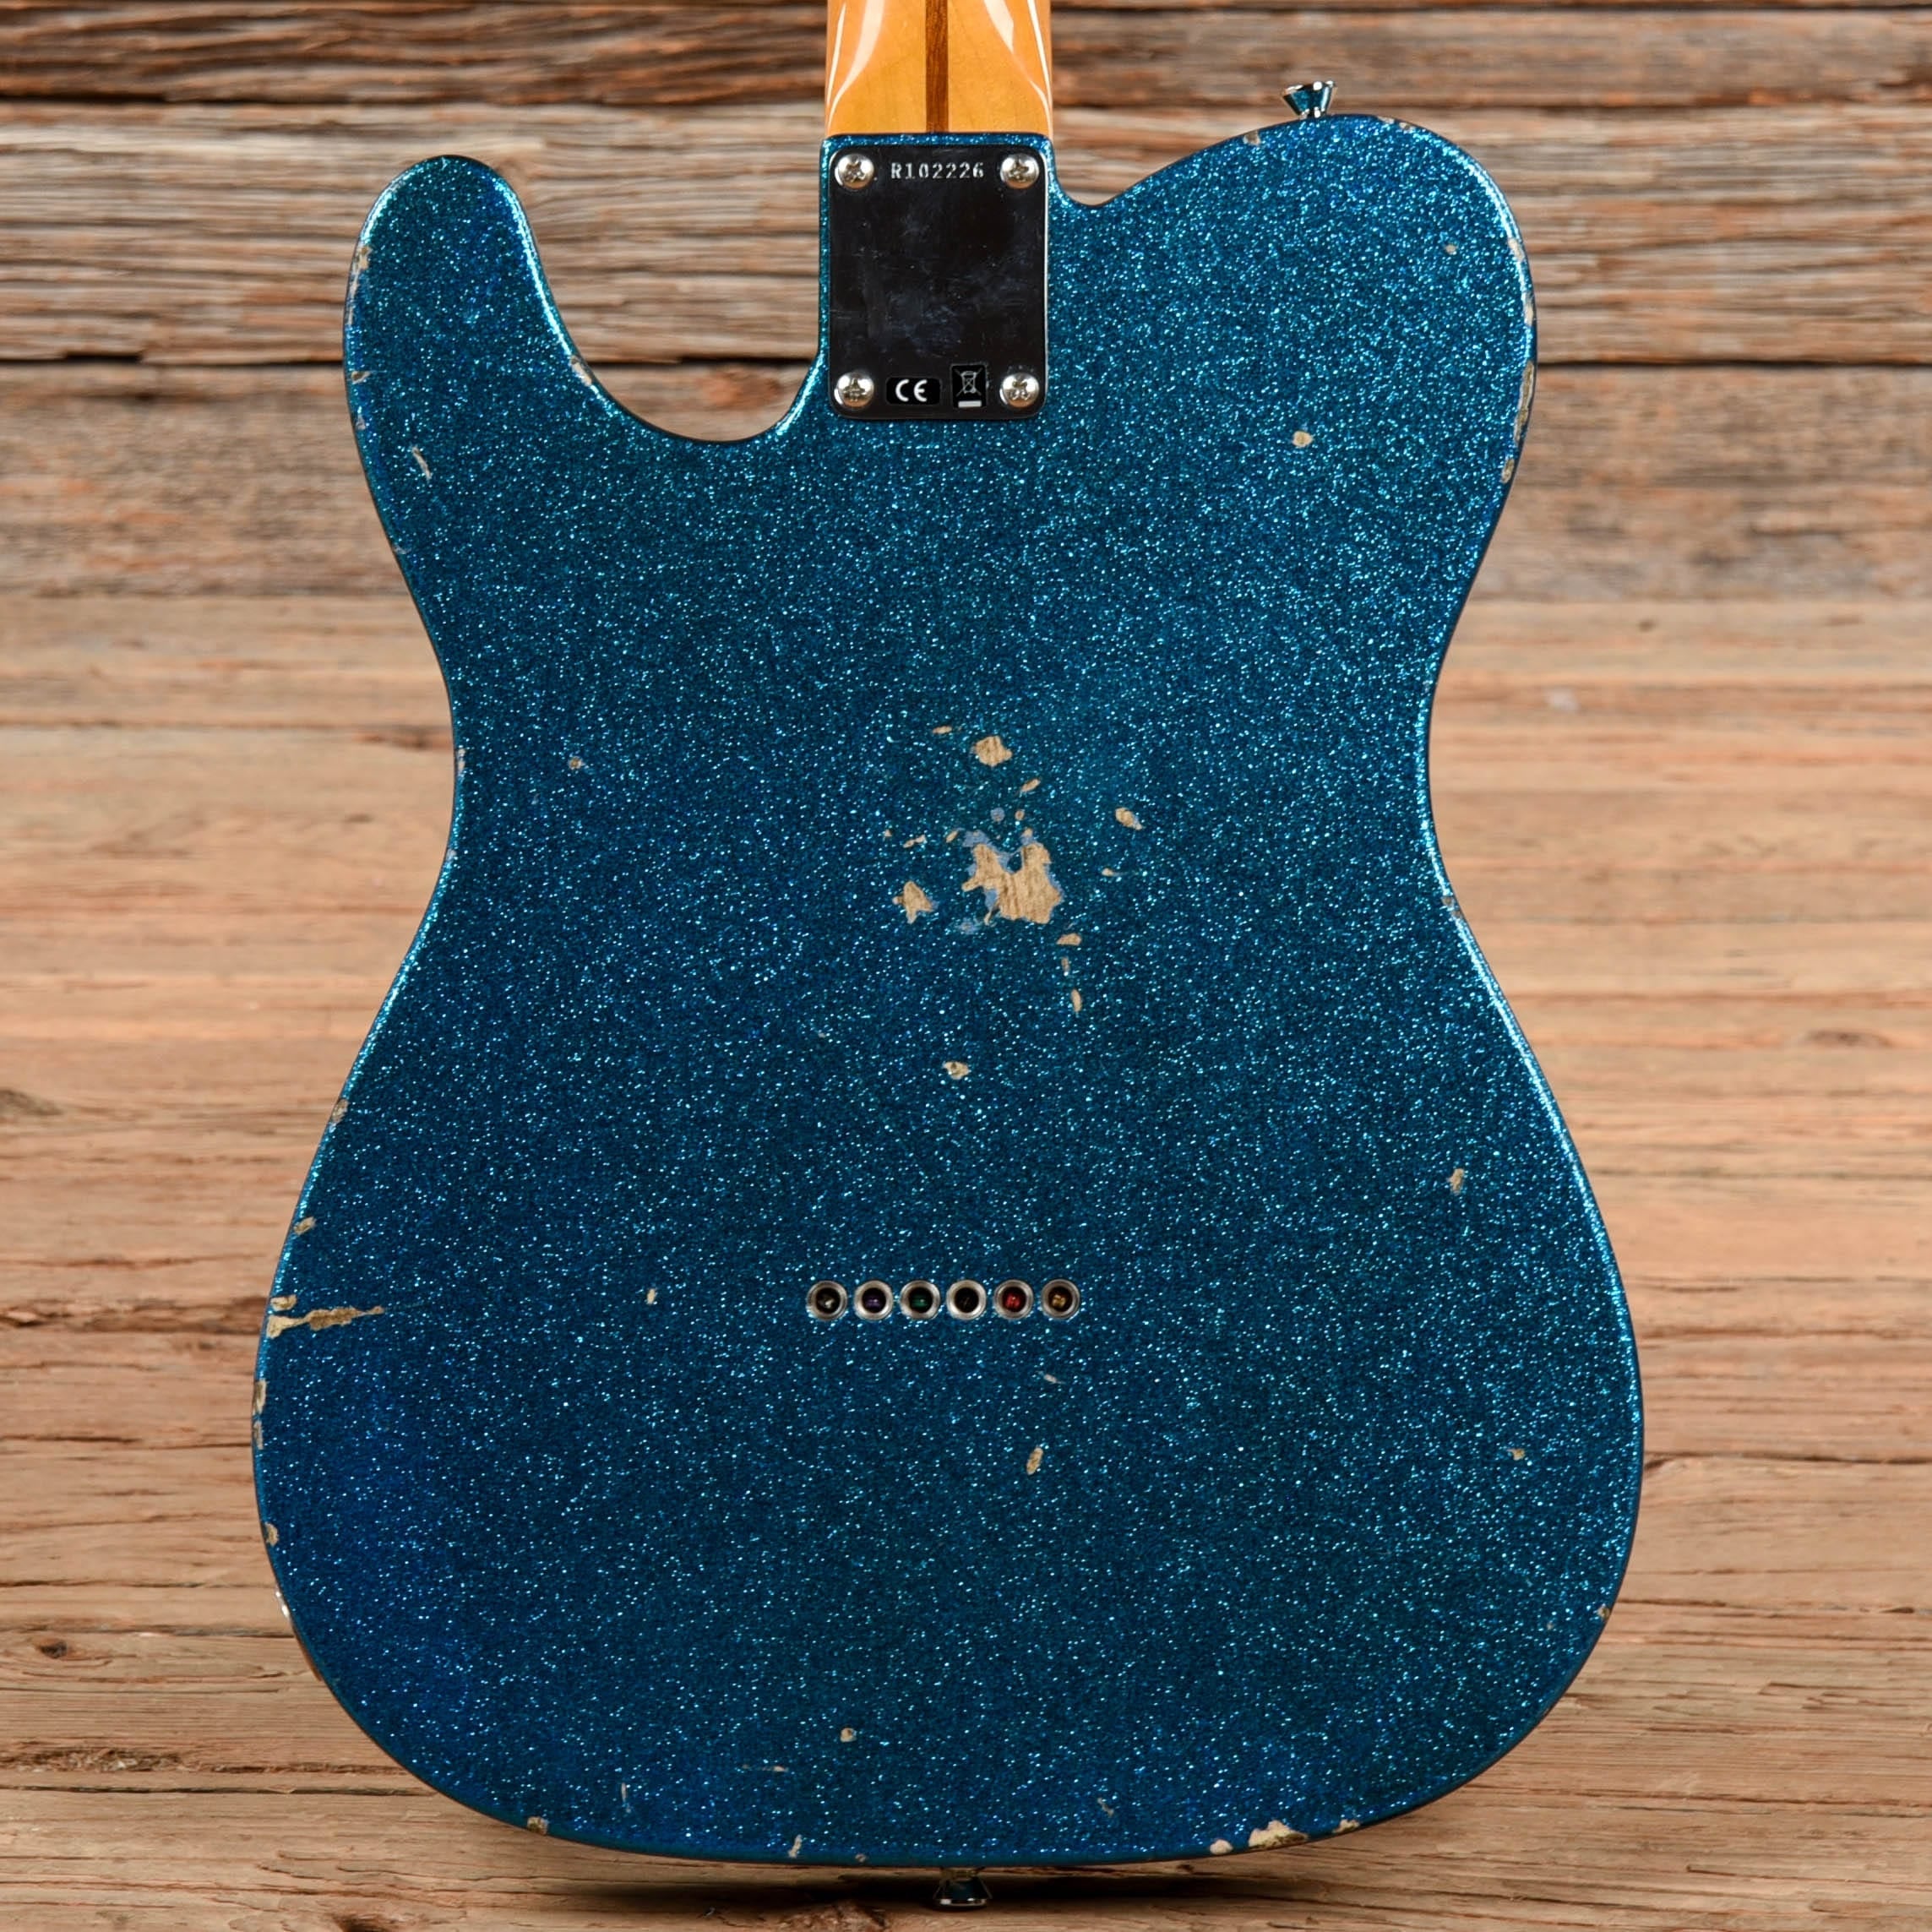 Fender Custom Shop Chicago Special 55 Telecaster Reissue Journeyman Relic Aged Blue Sparkle 2019 Electric Guitars / Solid Body